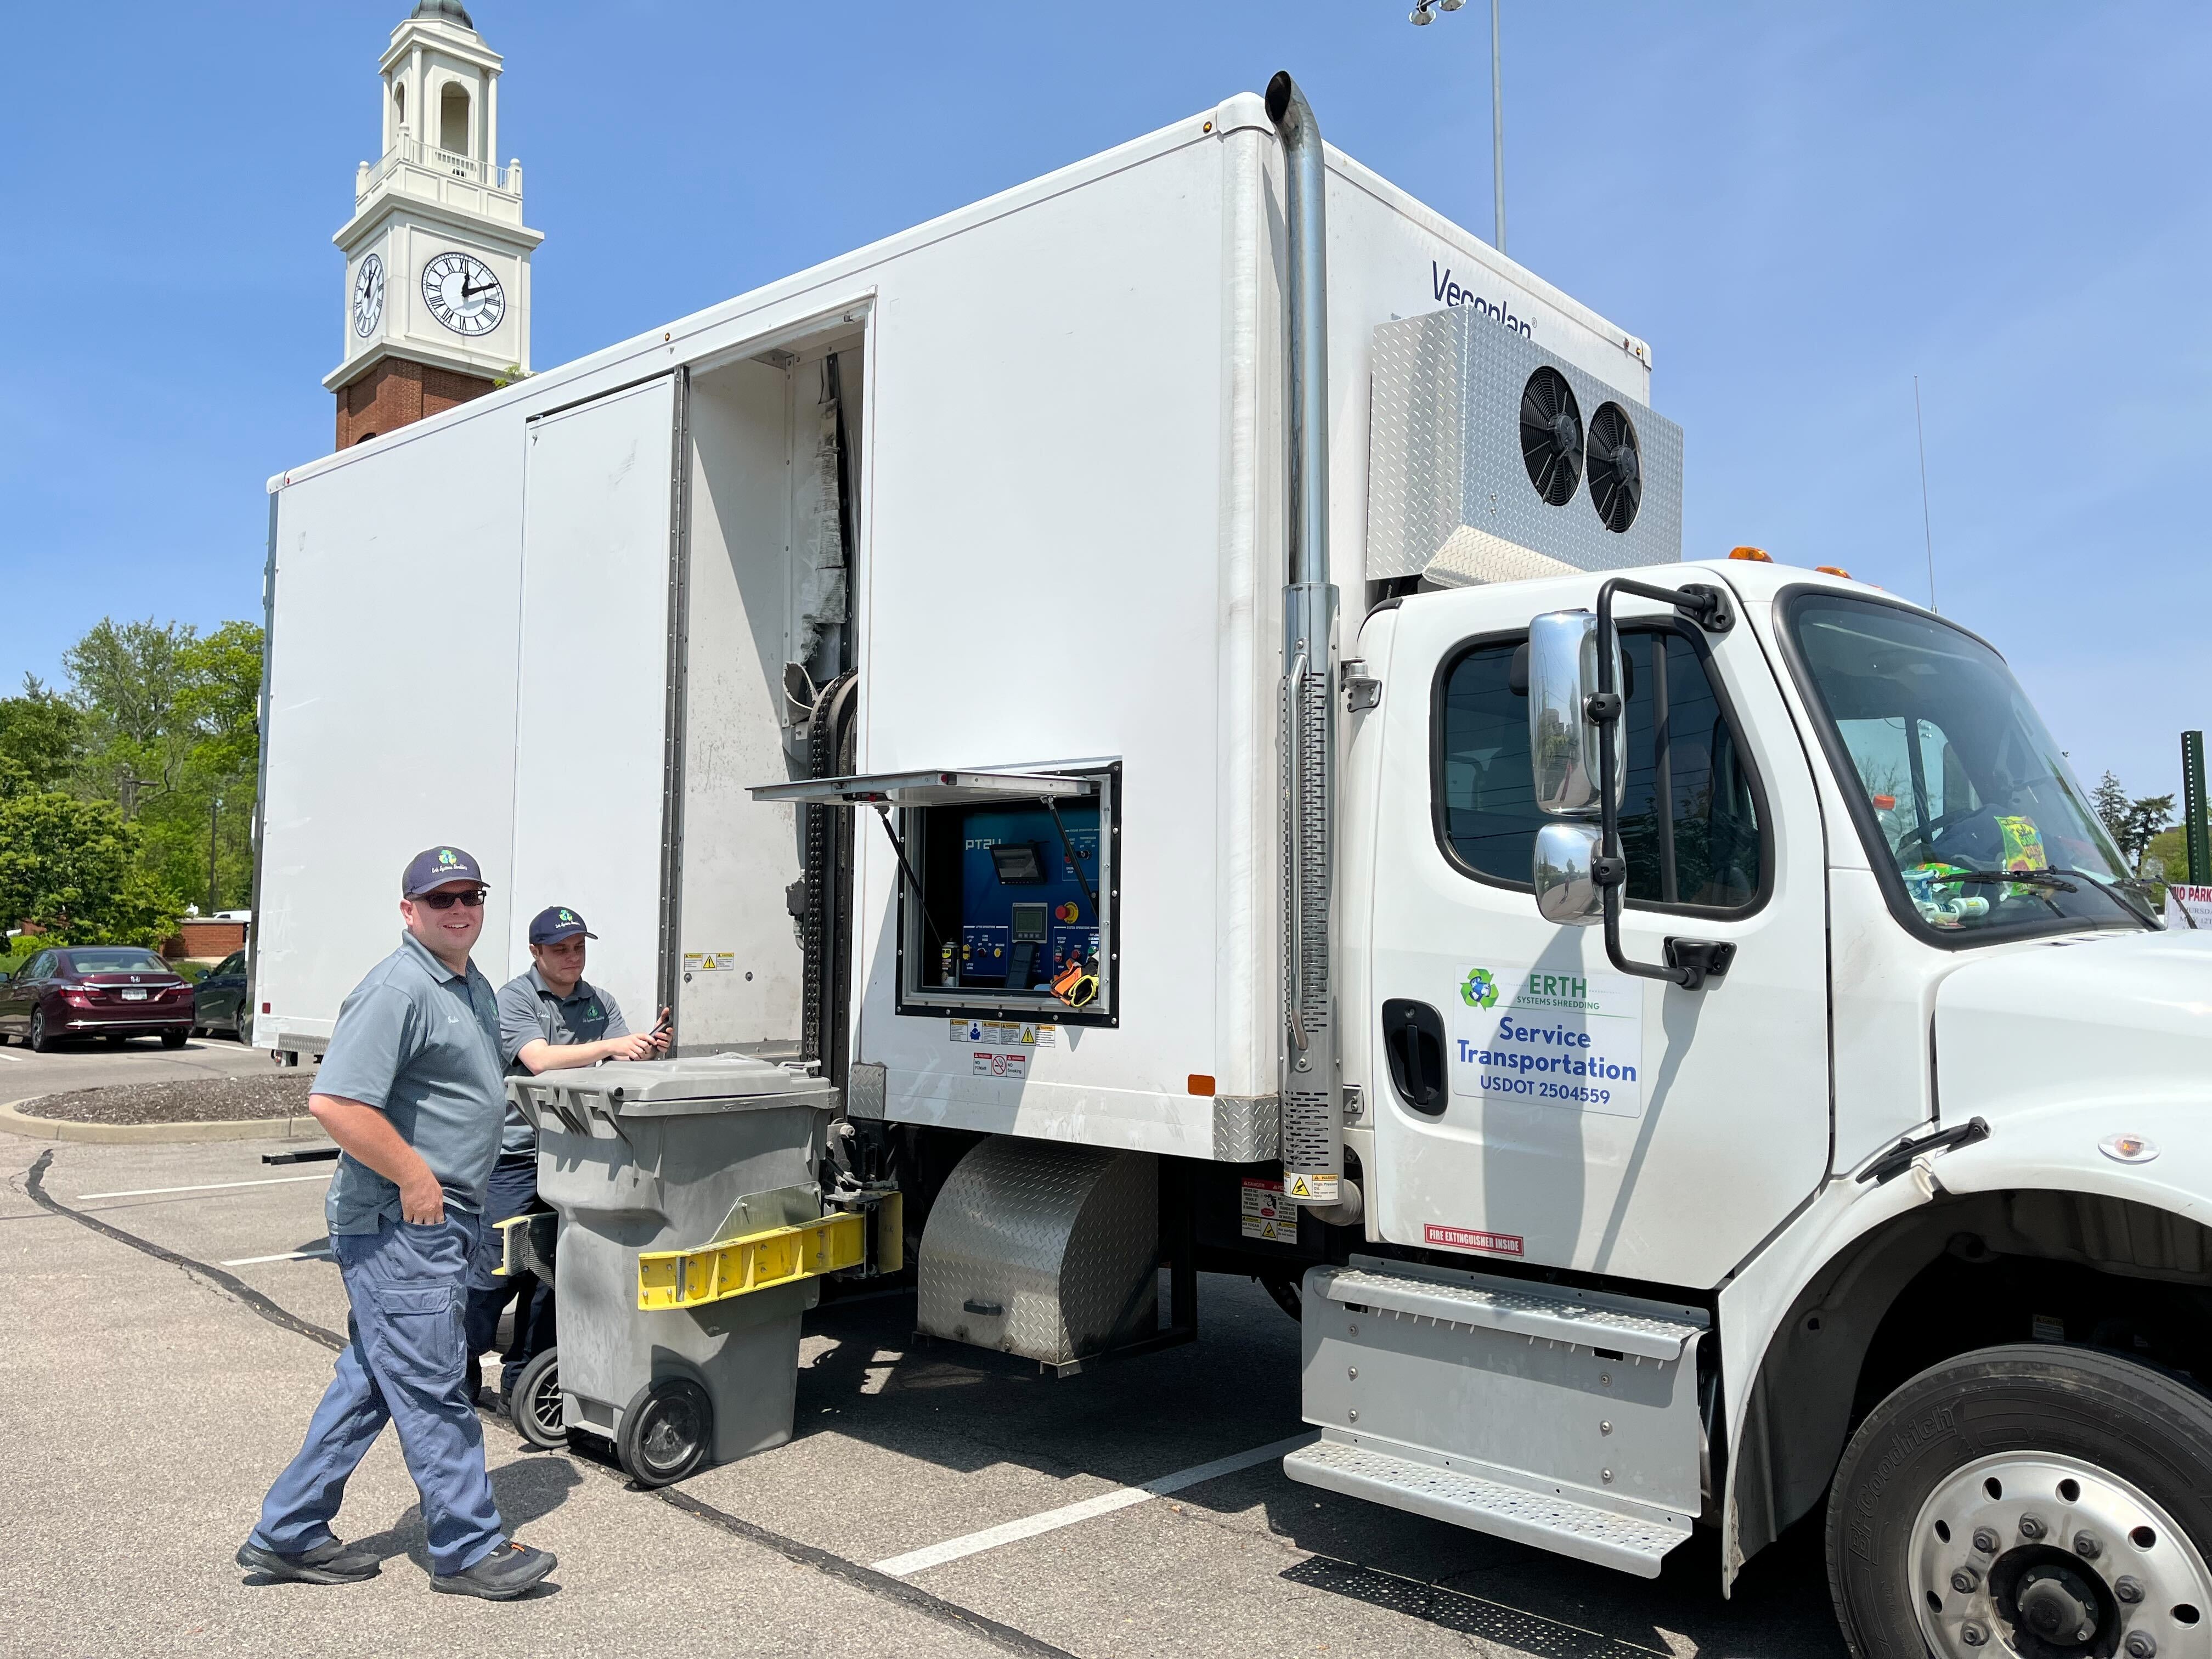 ERTH Systems Shredding truck used at Miami's Shredfest event.